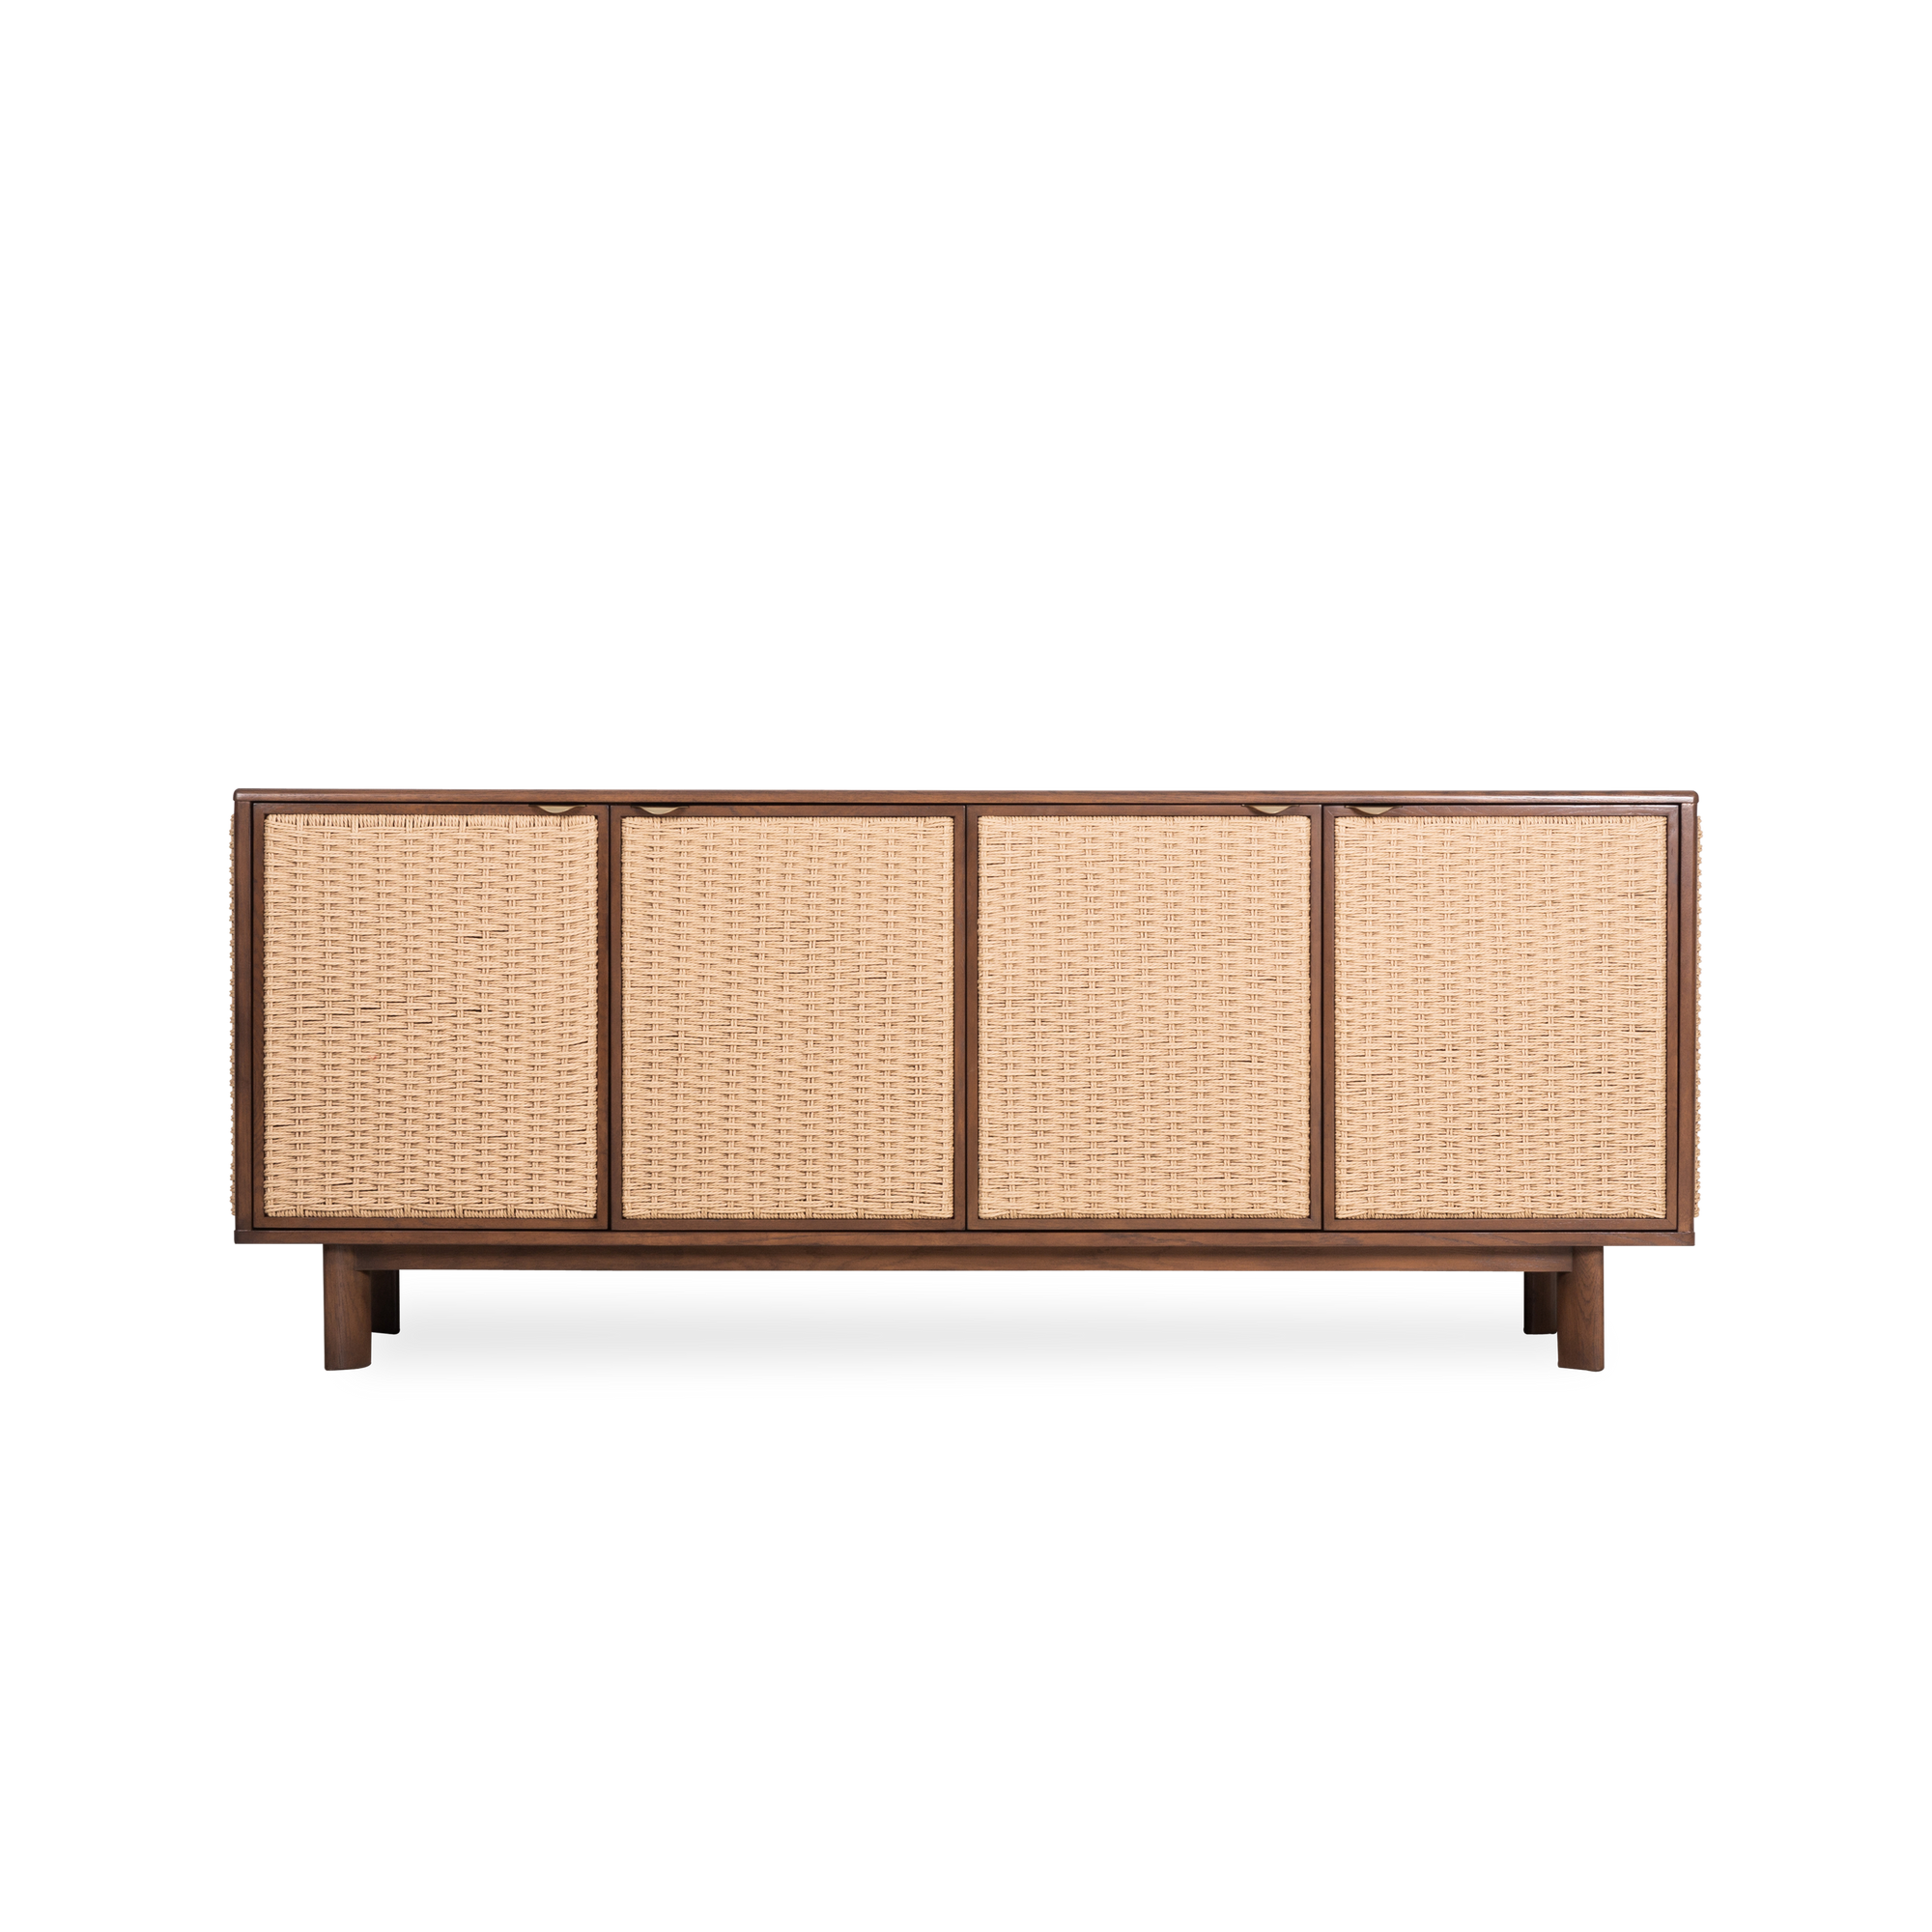 With clean lines, the modern Vanna Sideboard celebrates neutral with an oak veneer frame and thickly woven natural Danish cord panels.